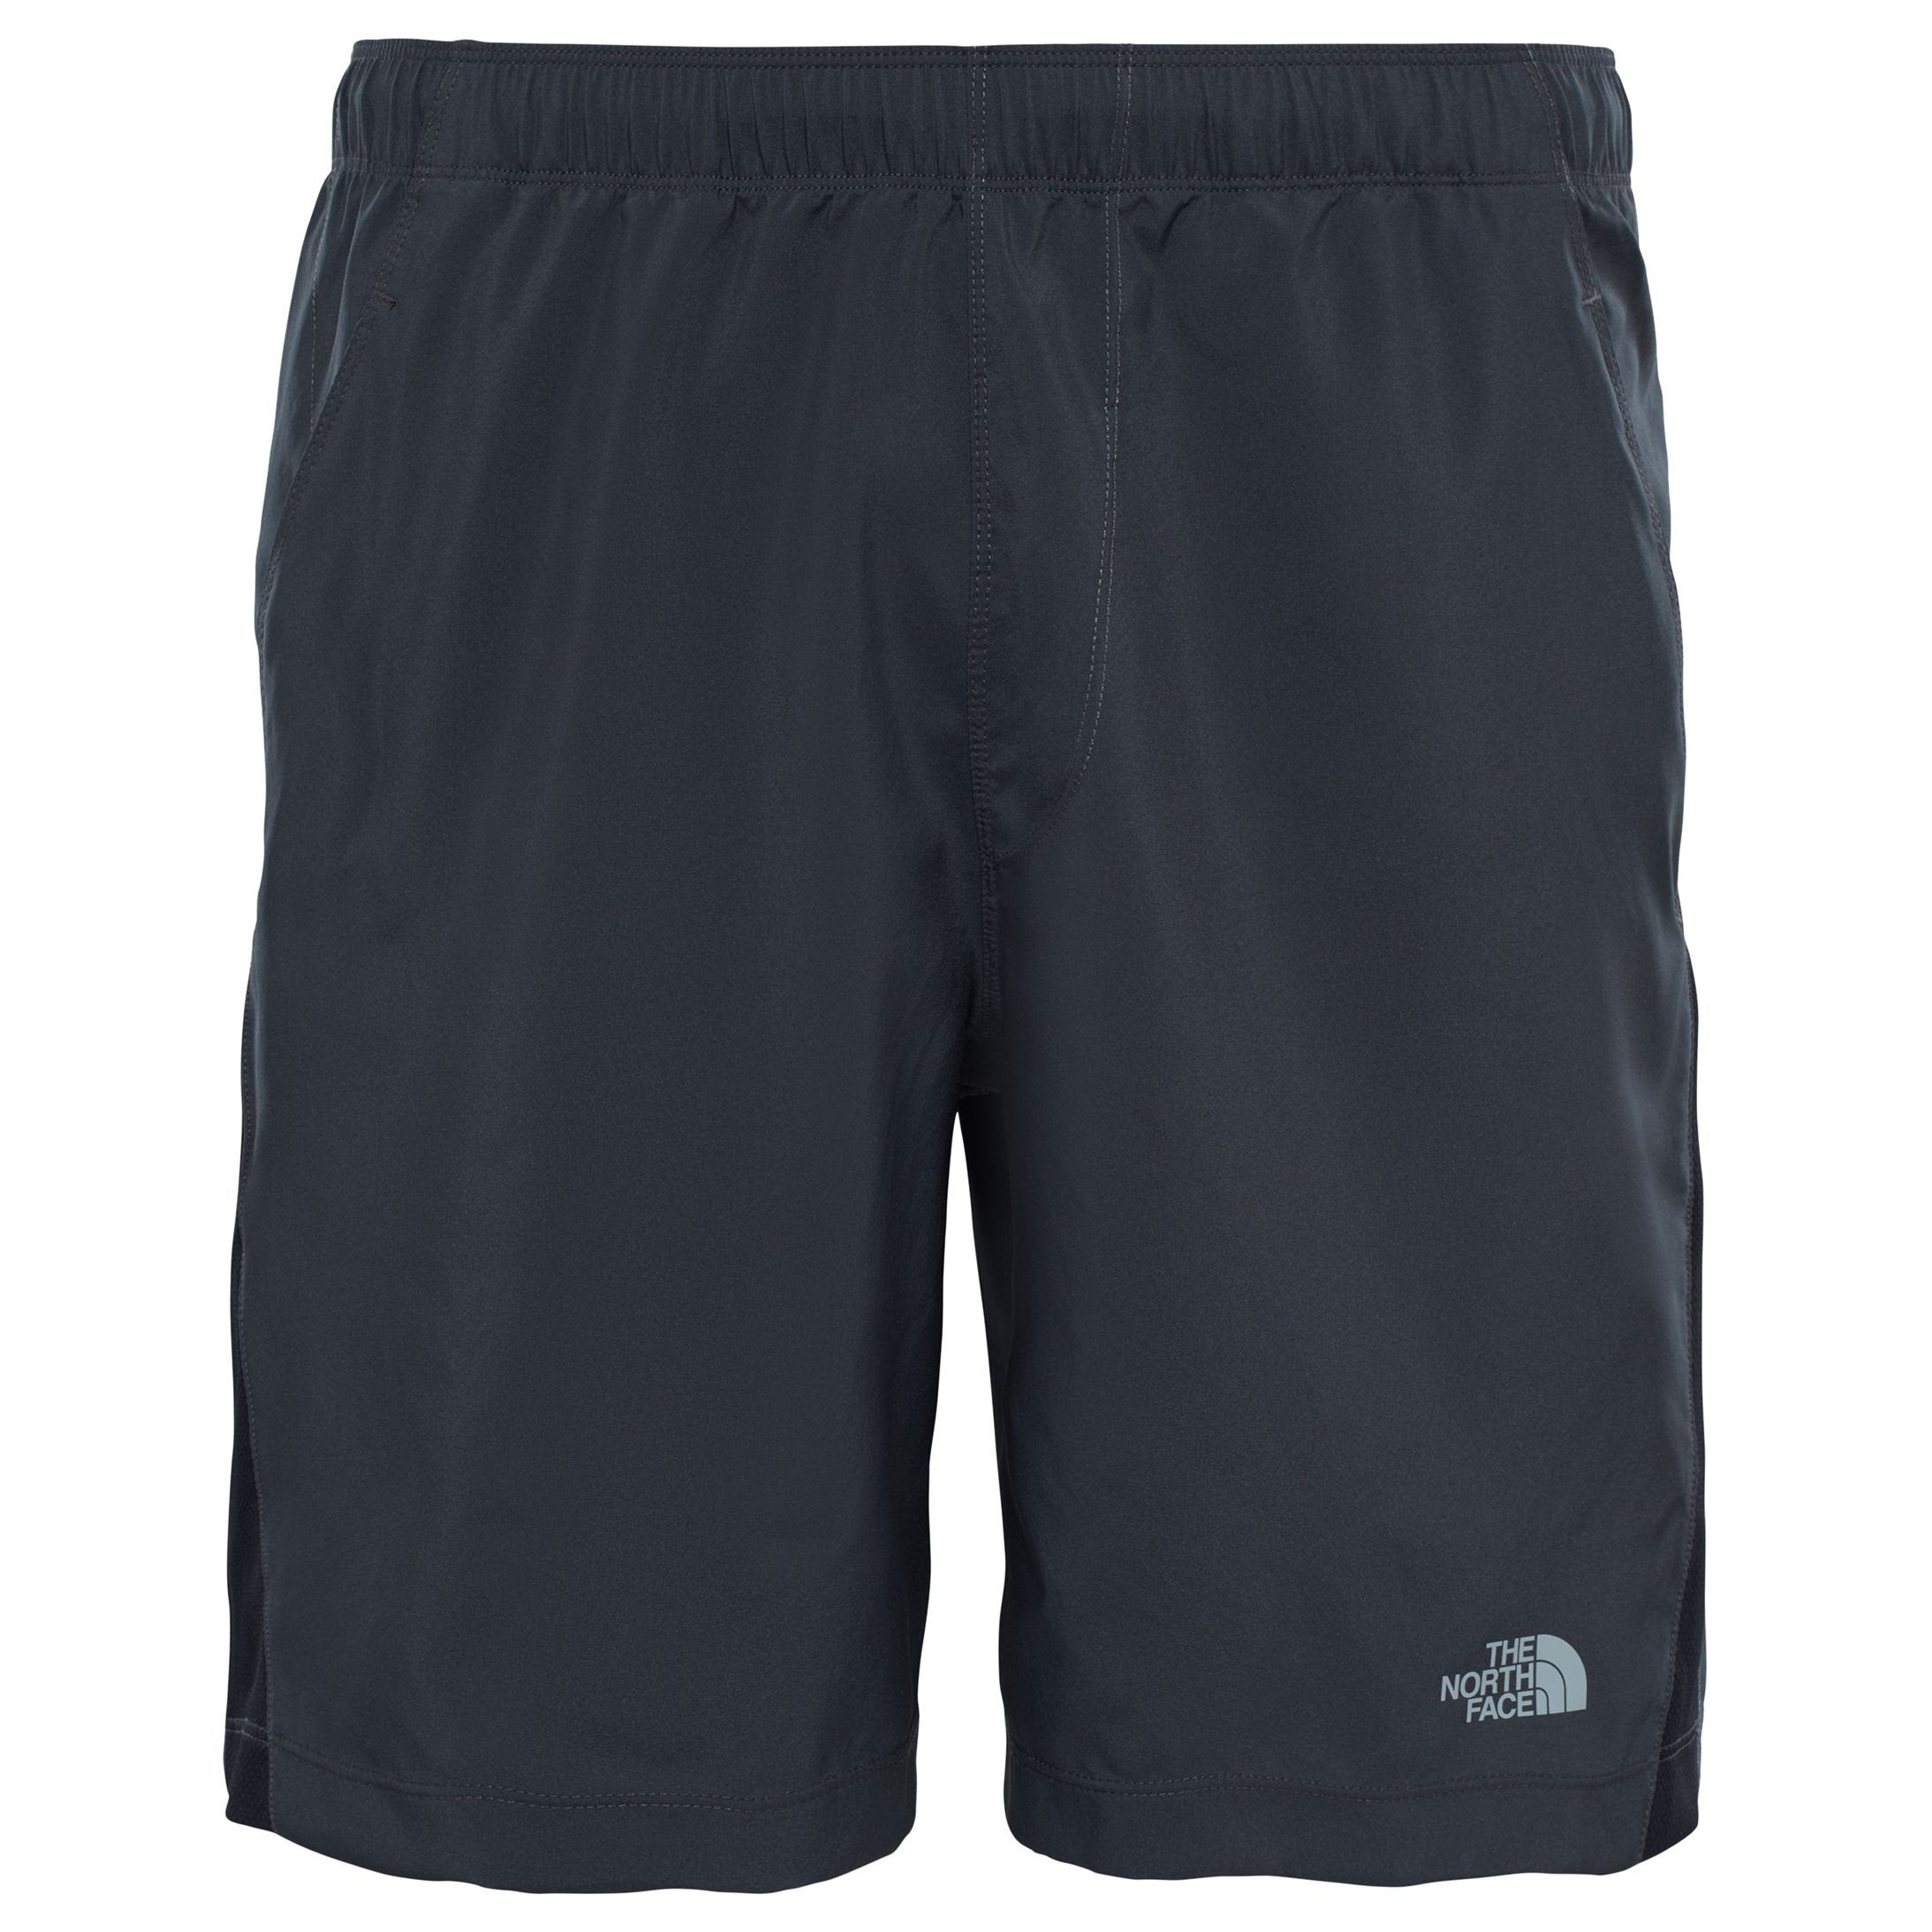 The North Face Reactor Shorts, Grey, M